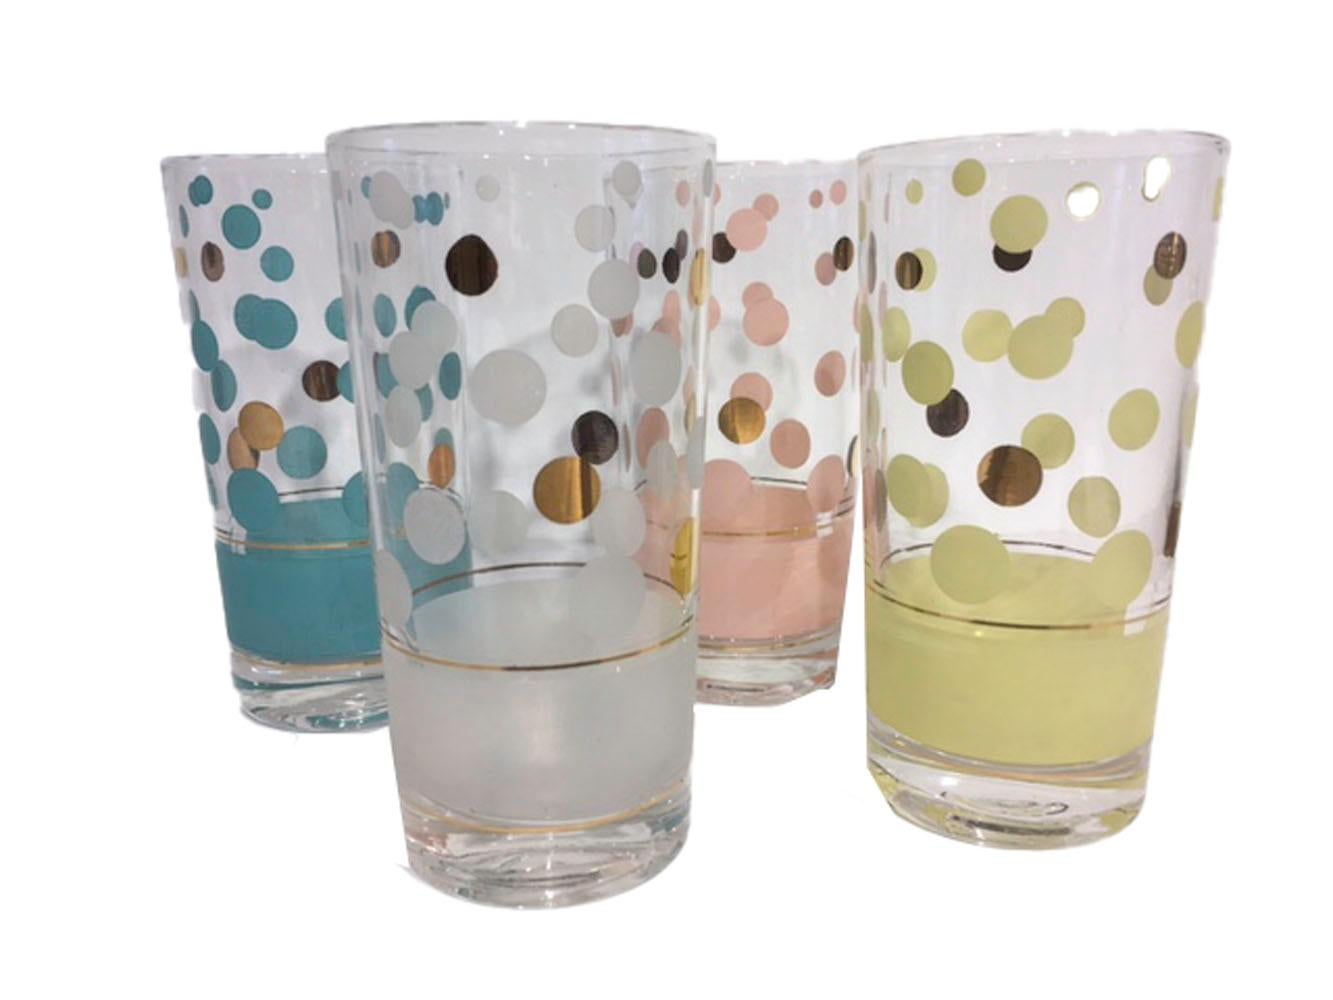 Vintage set of 8 highball glasses designed by Fred Press. Two each of four colors, pink, aqua, white and yellow. Each glass has a band of color at the base with dots of various sizes above a gold line, the dots are in the same color as the band as